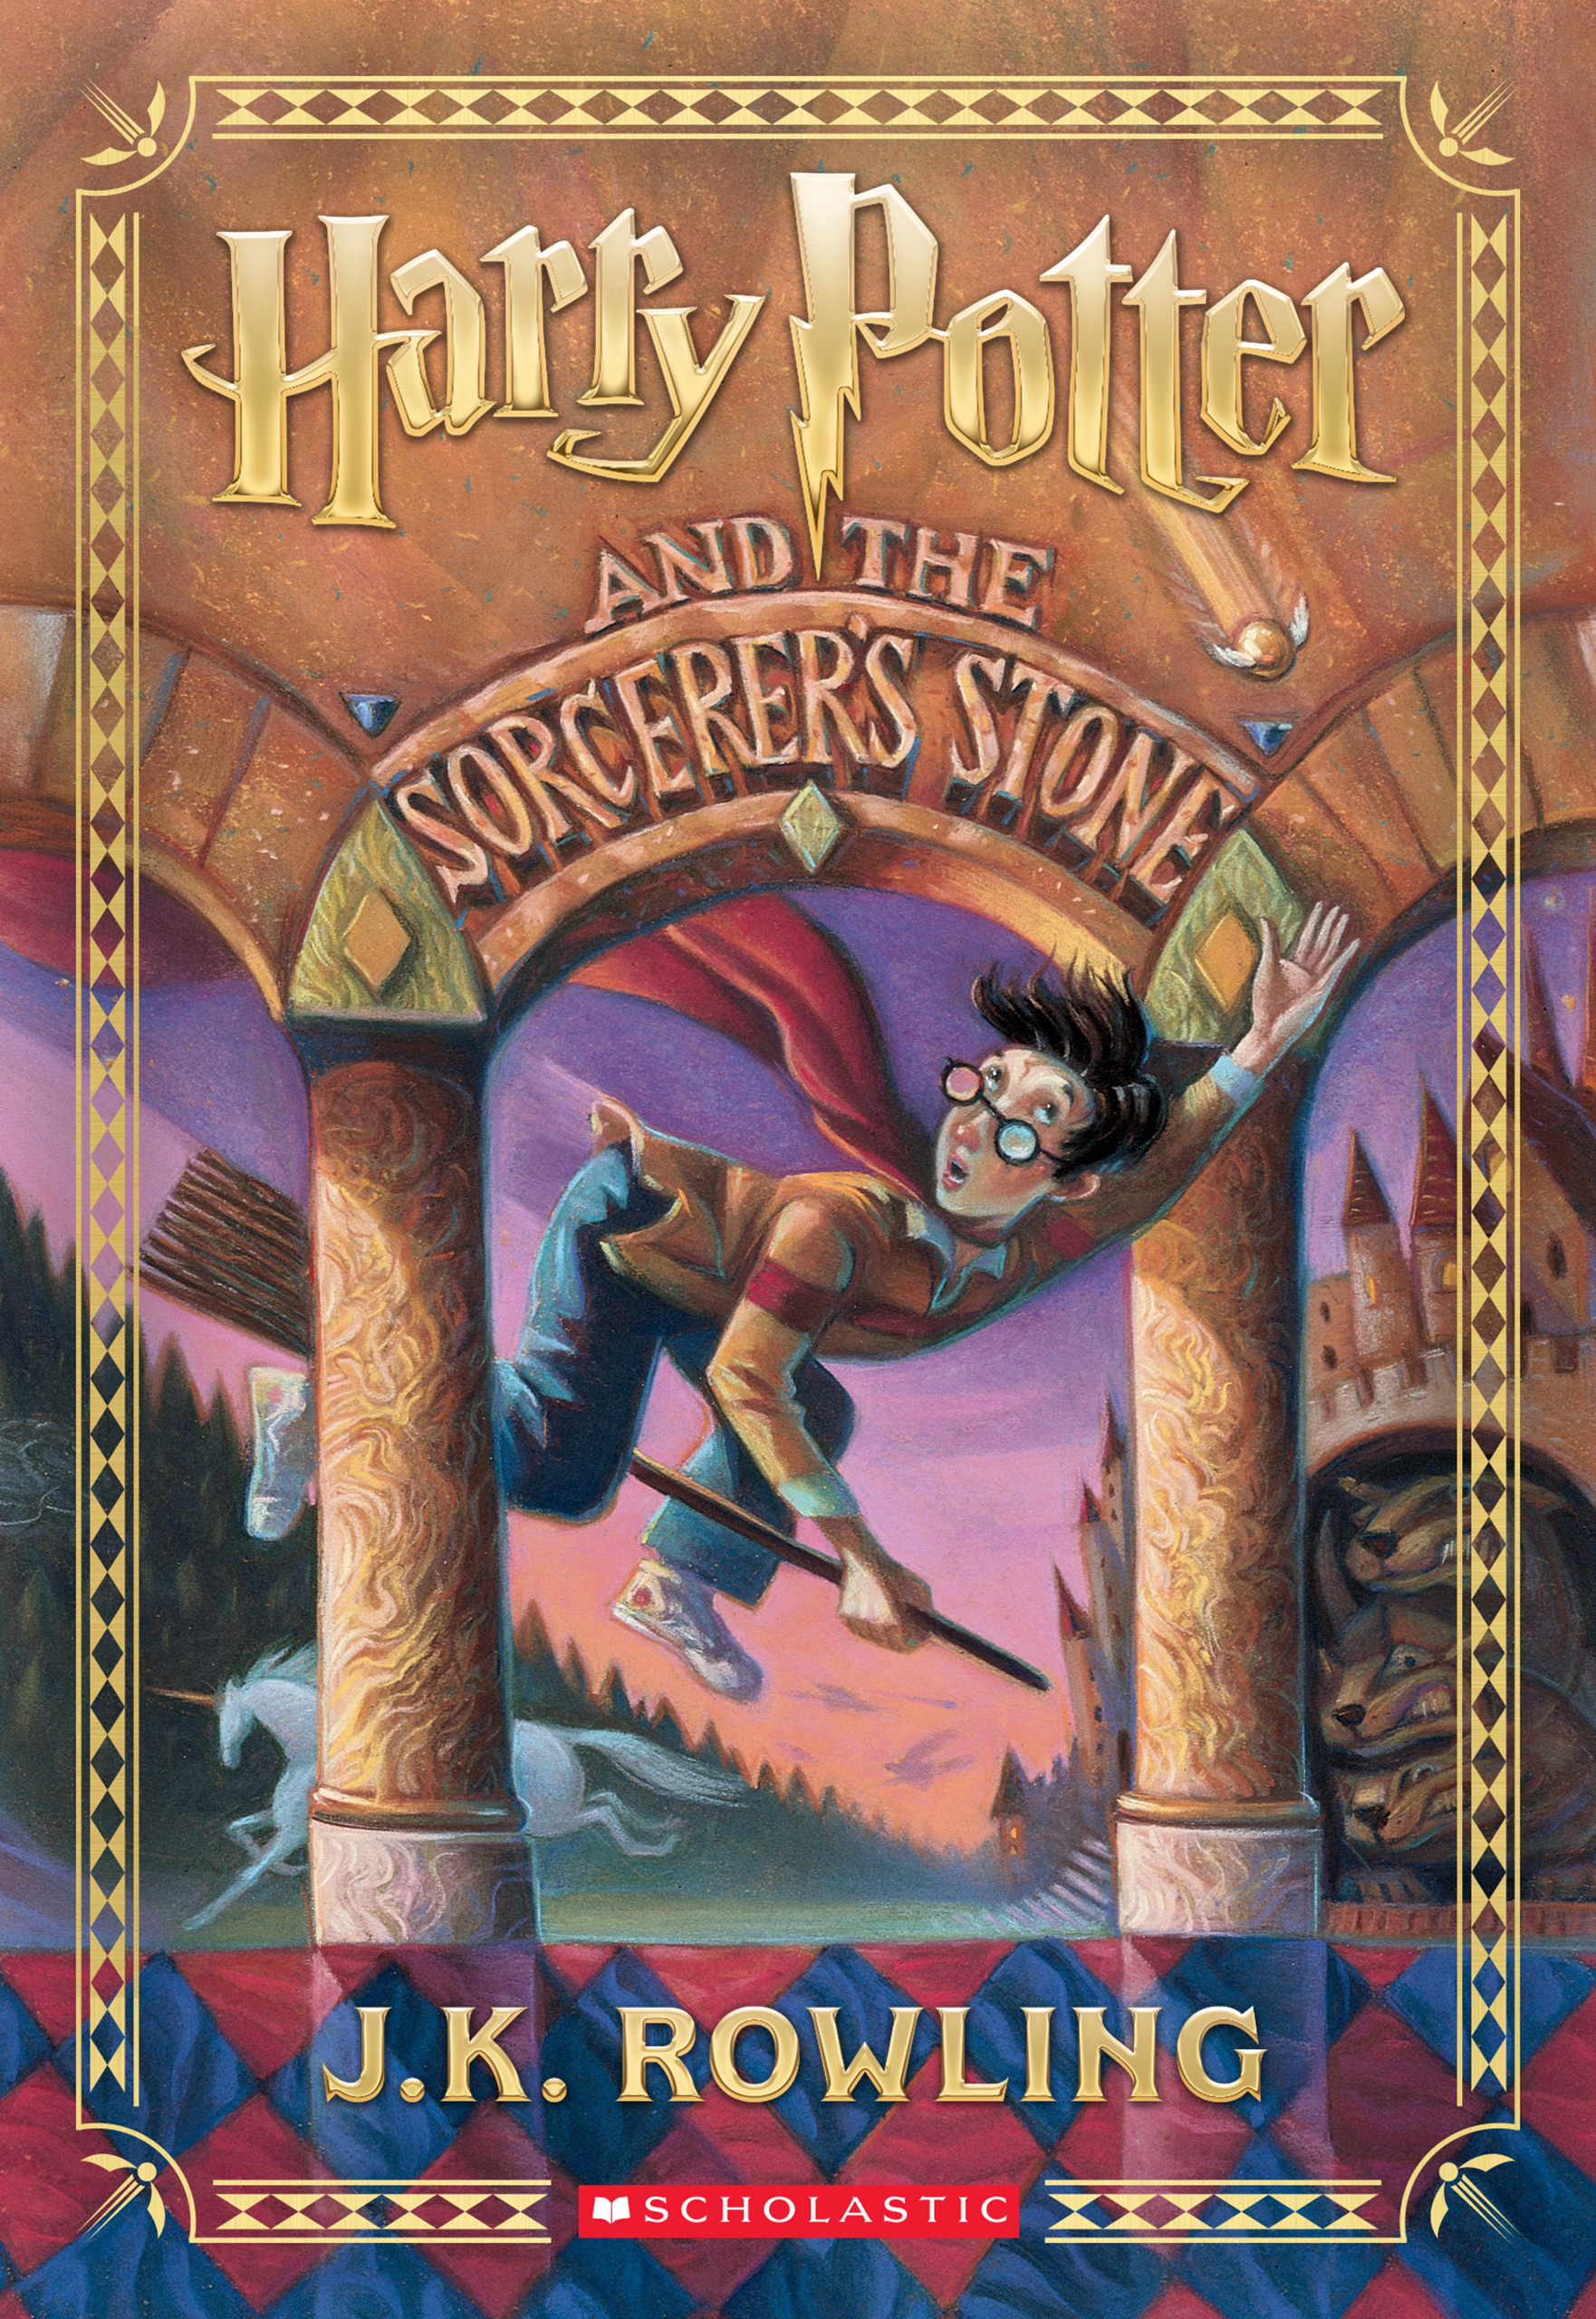 Scholastic celebrates 25 years of Harry Potter and the Sorcerer's 